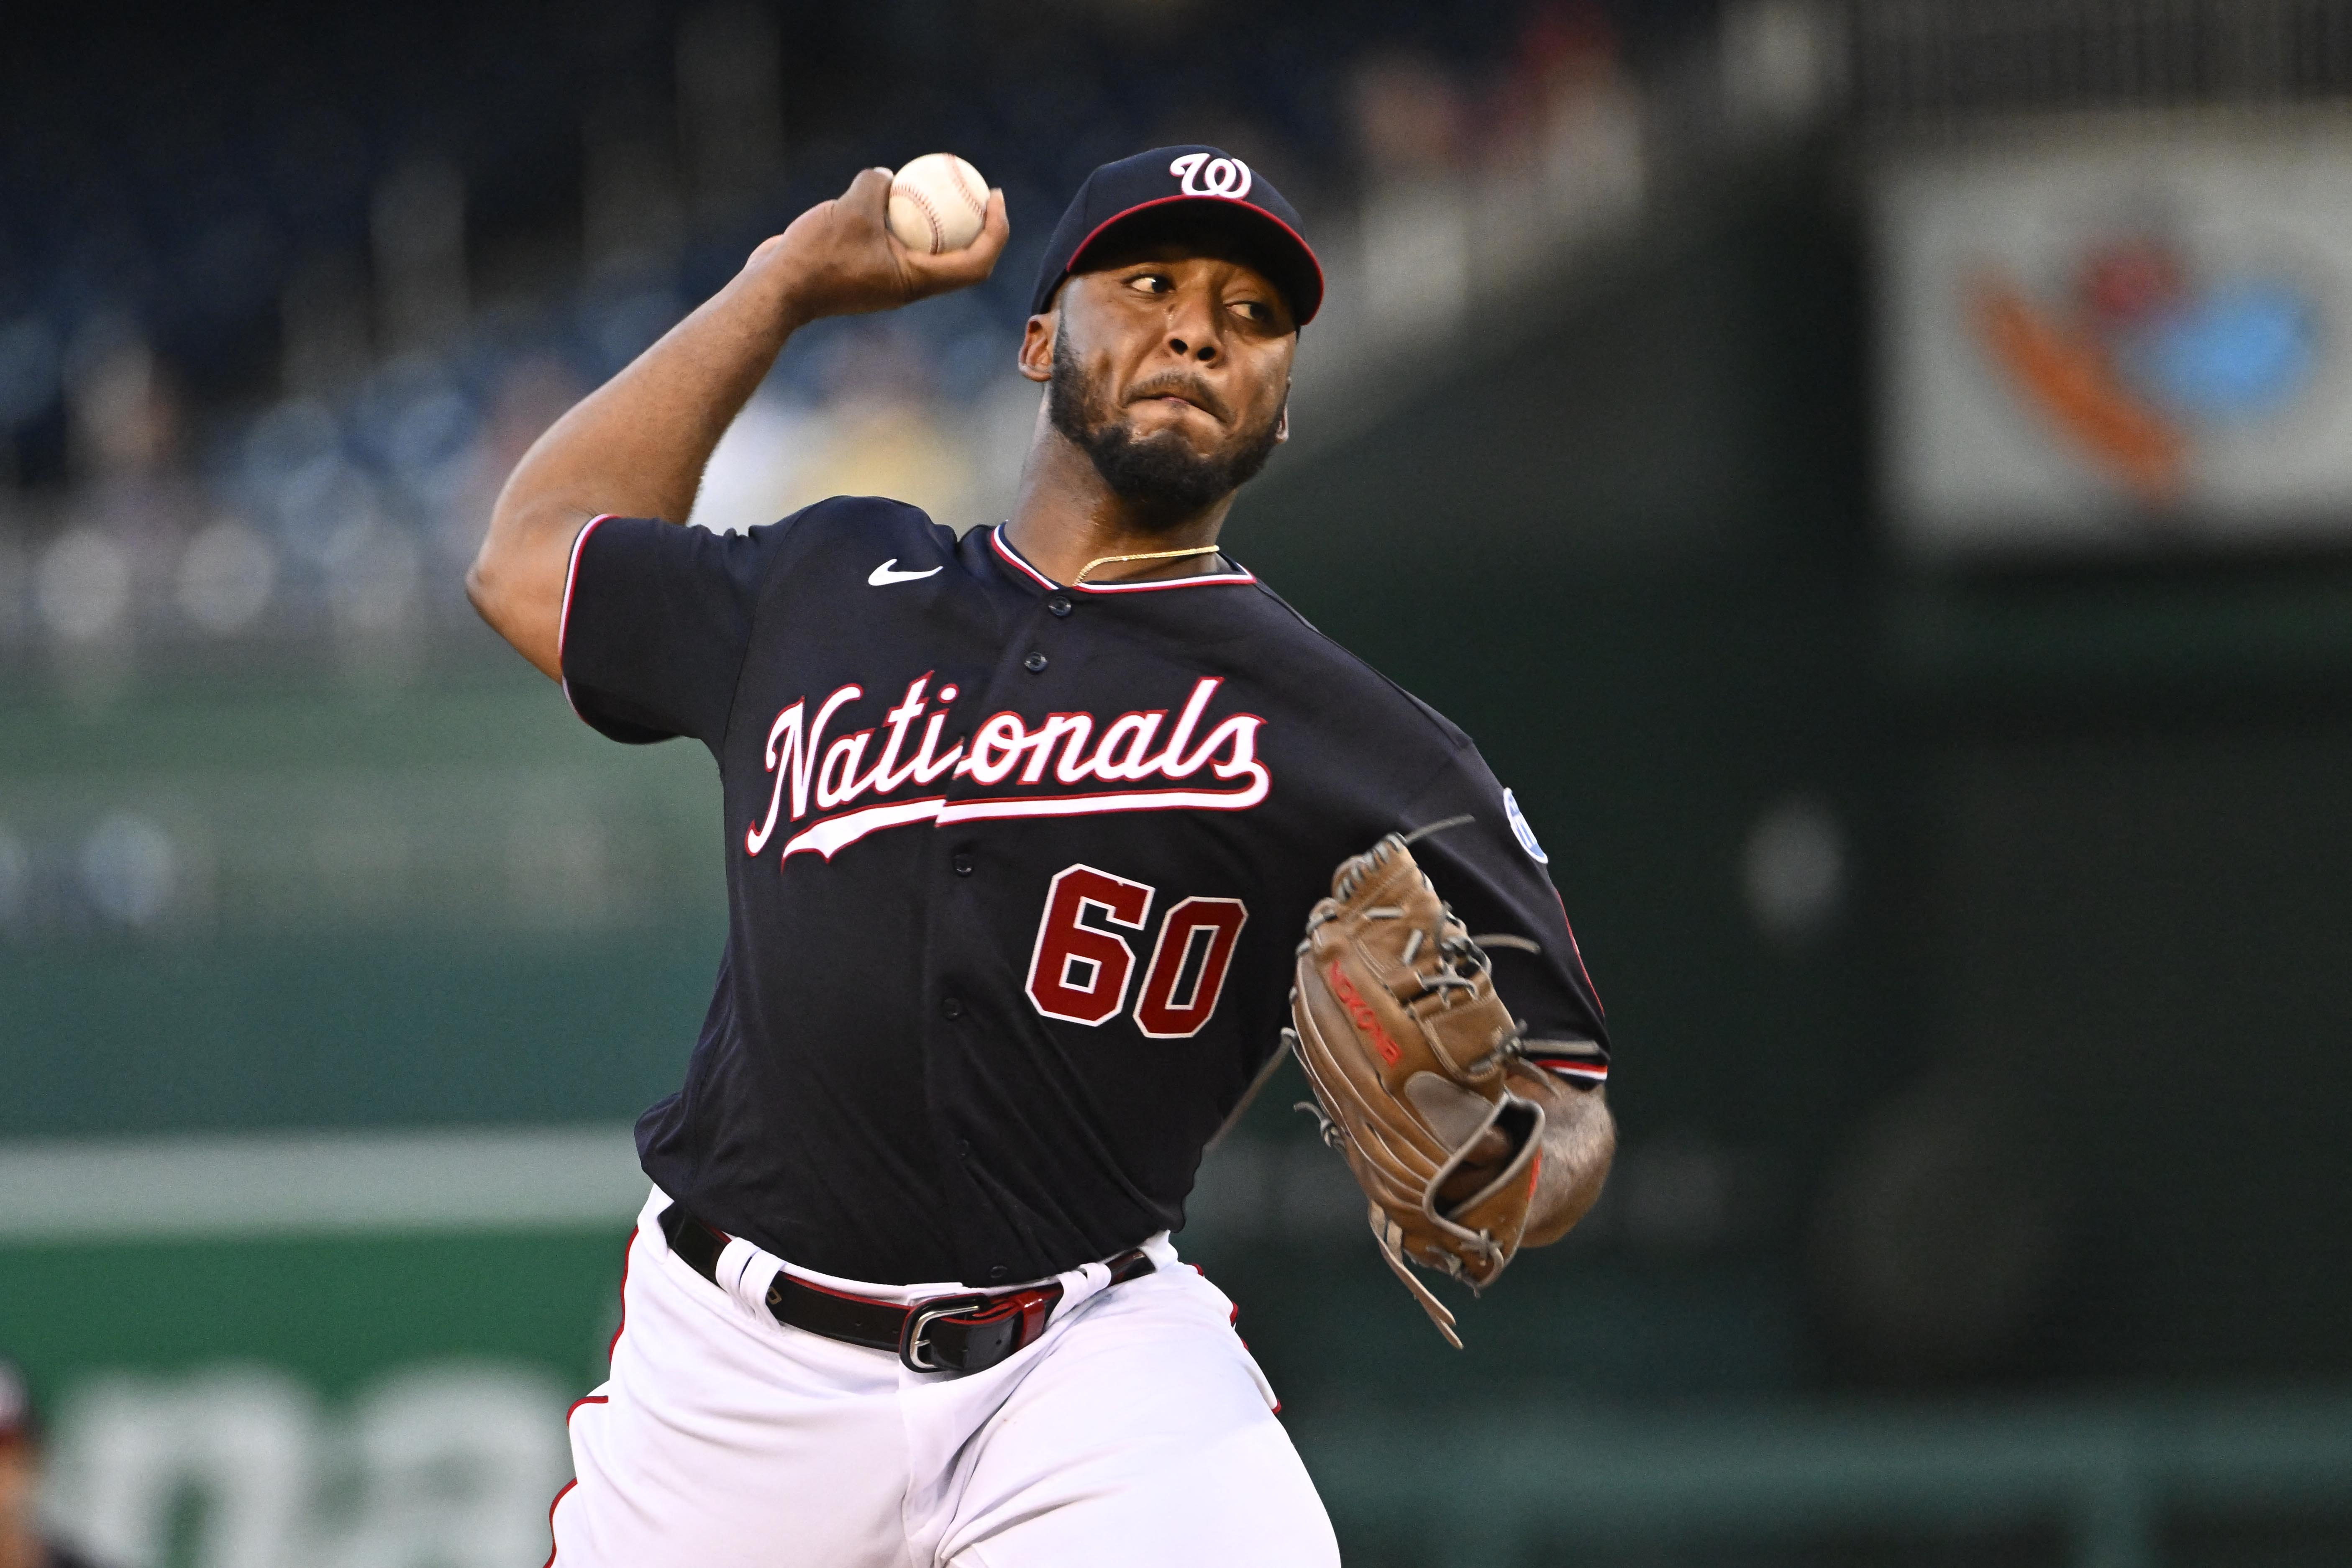 Washington Nationals' three-game win streak ends with 3-2 loss to